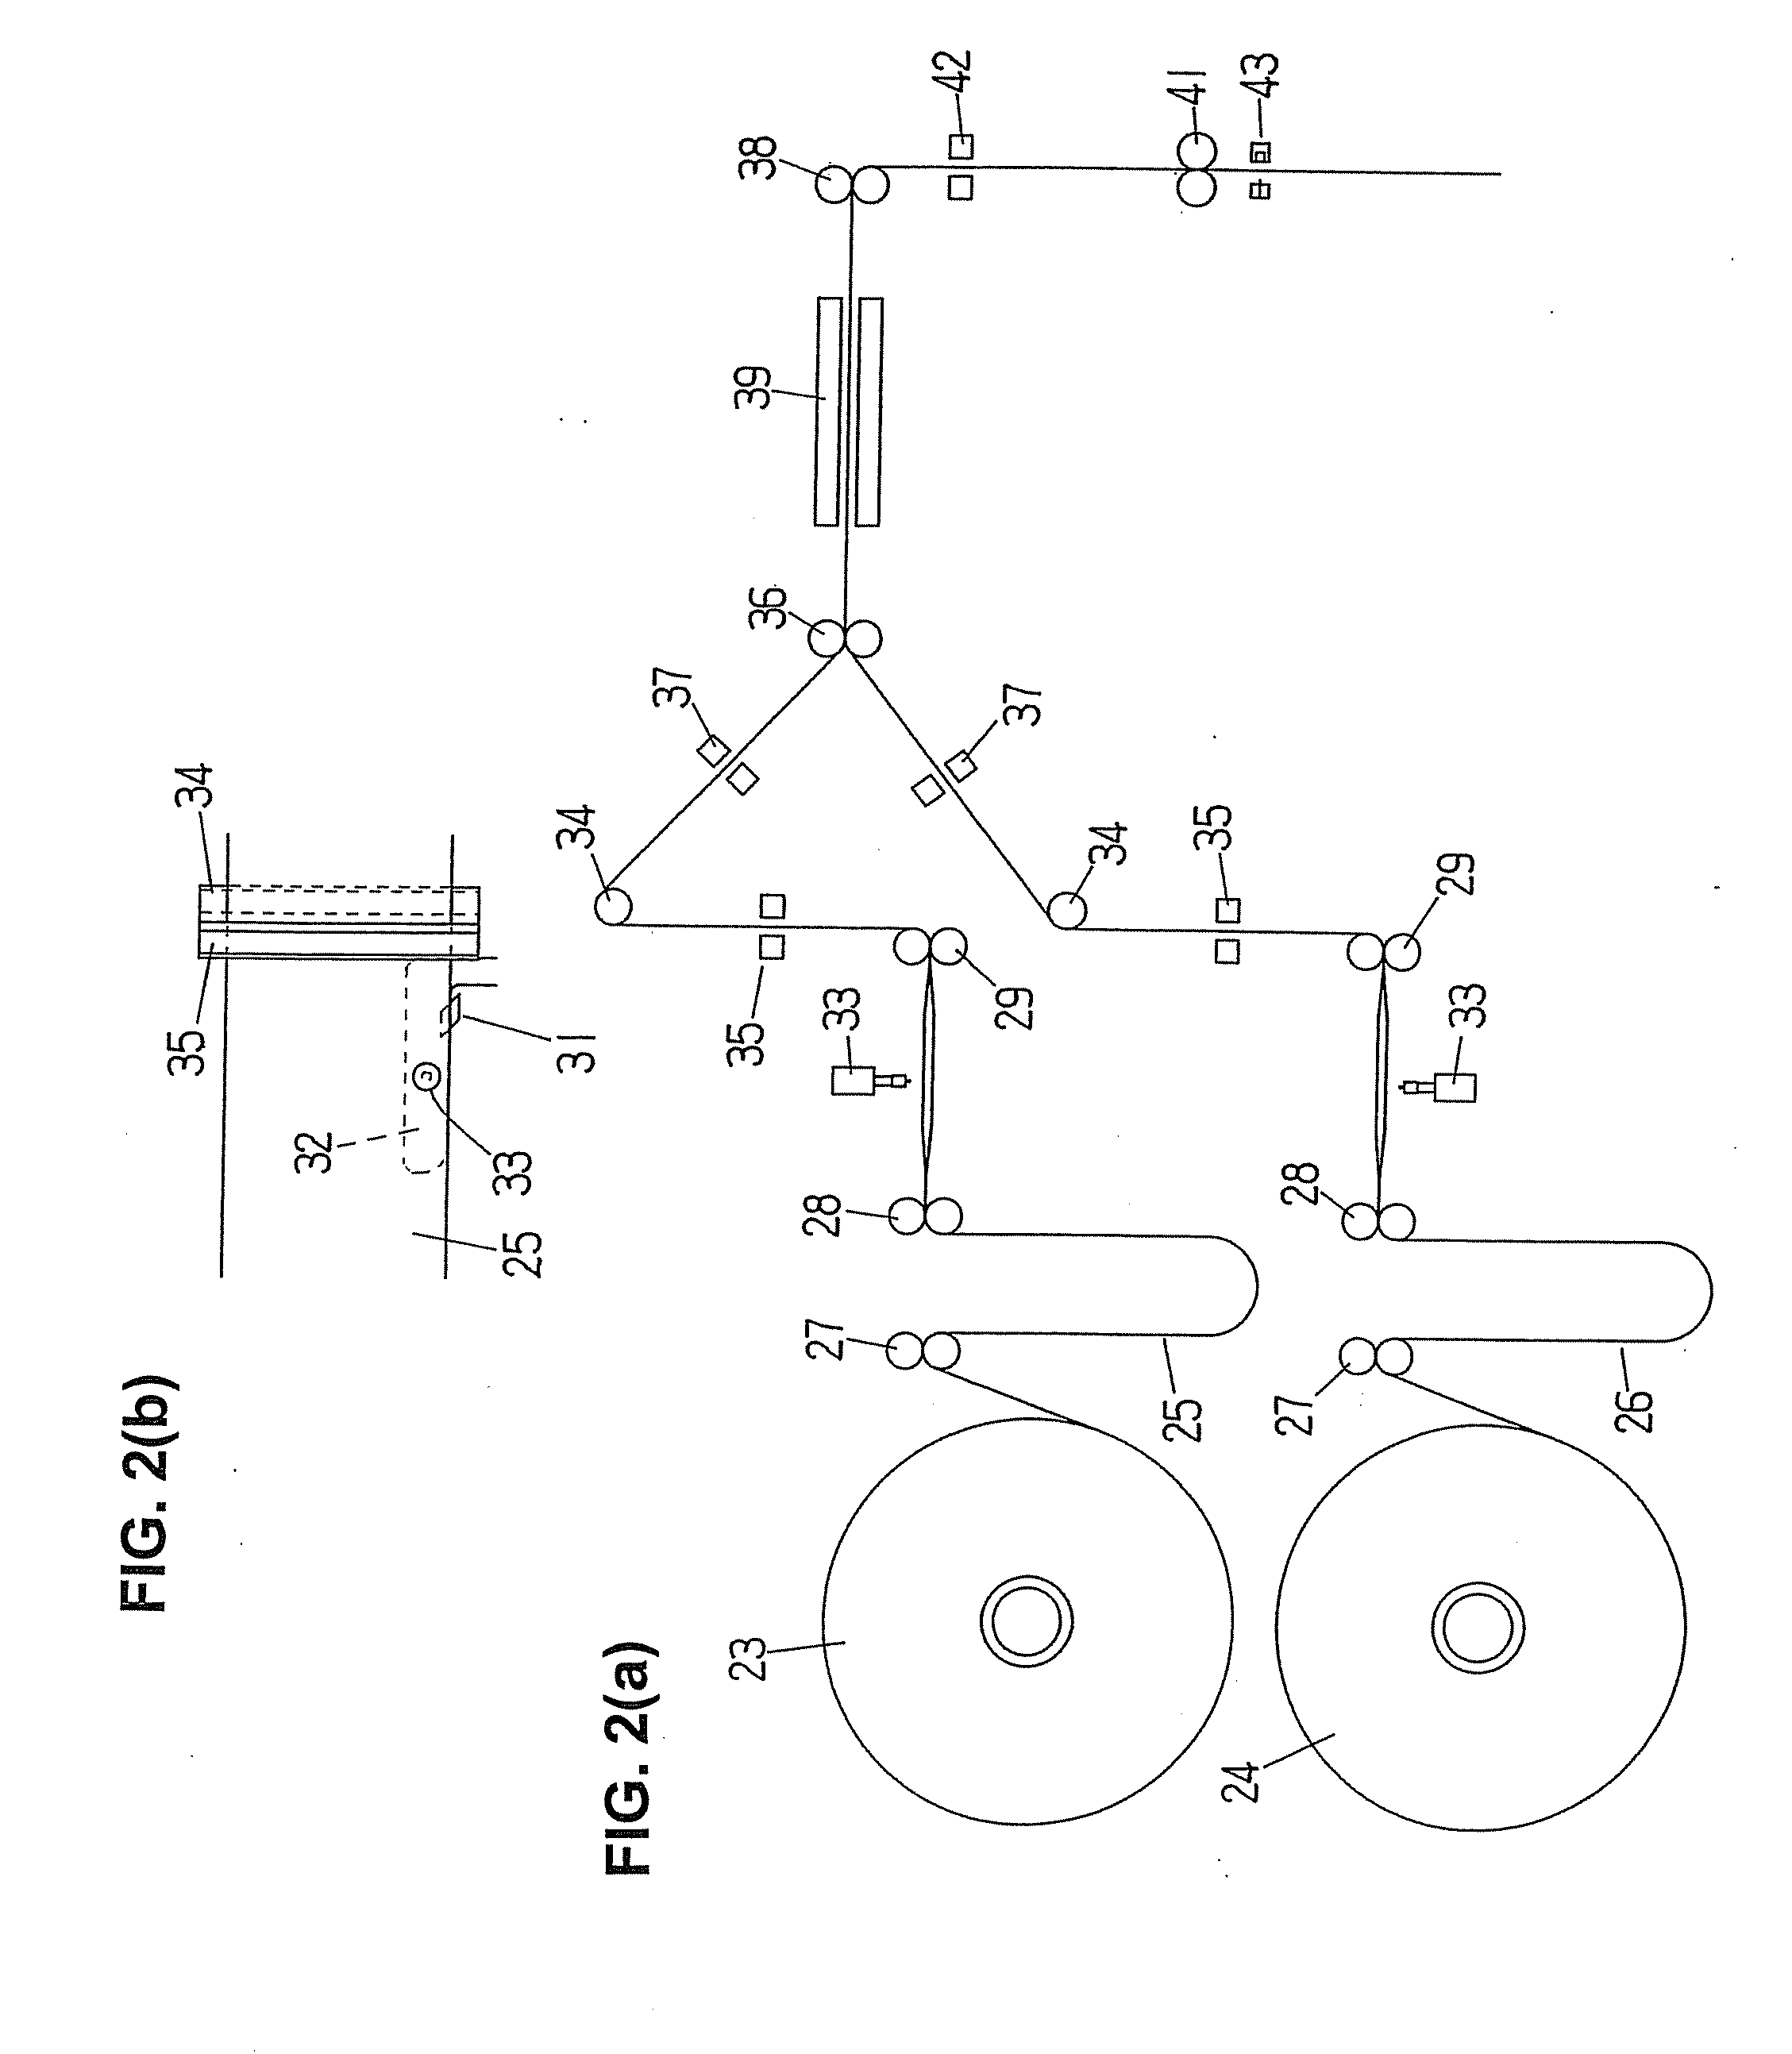 Method for Sealing-in a Gas in a Bag with a Gas Filling Compartment